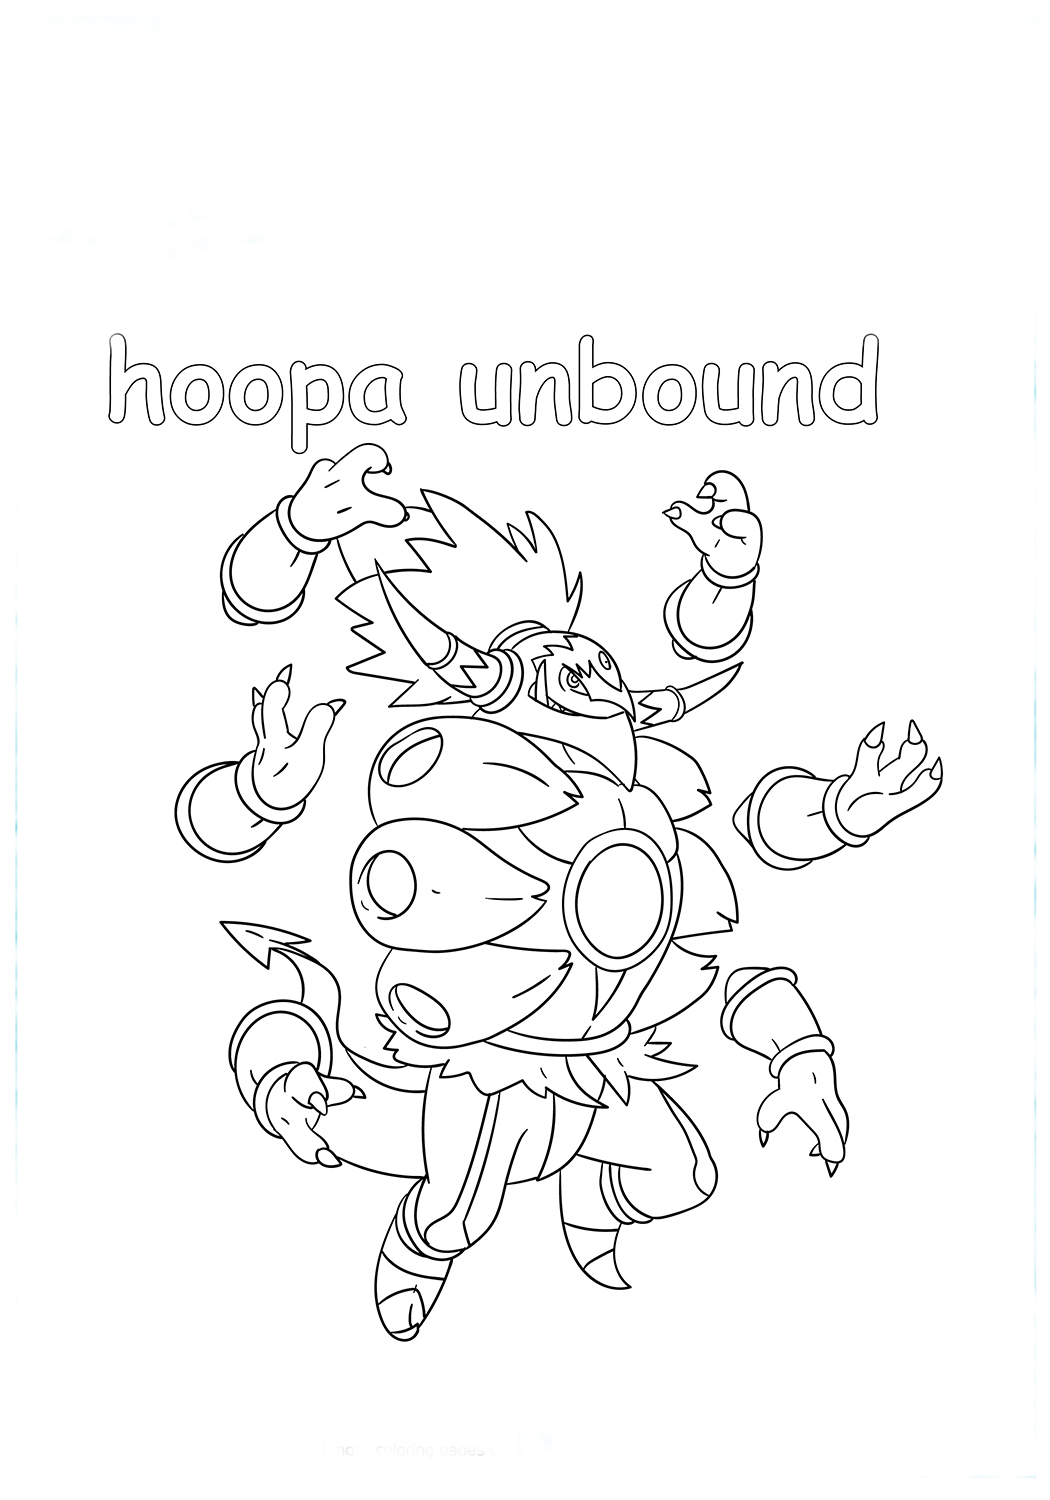 Hoopa Unbound Drawing